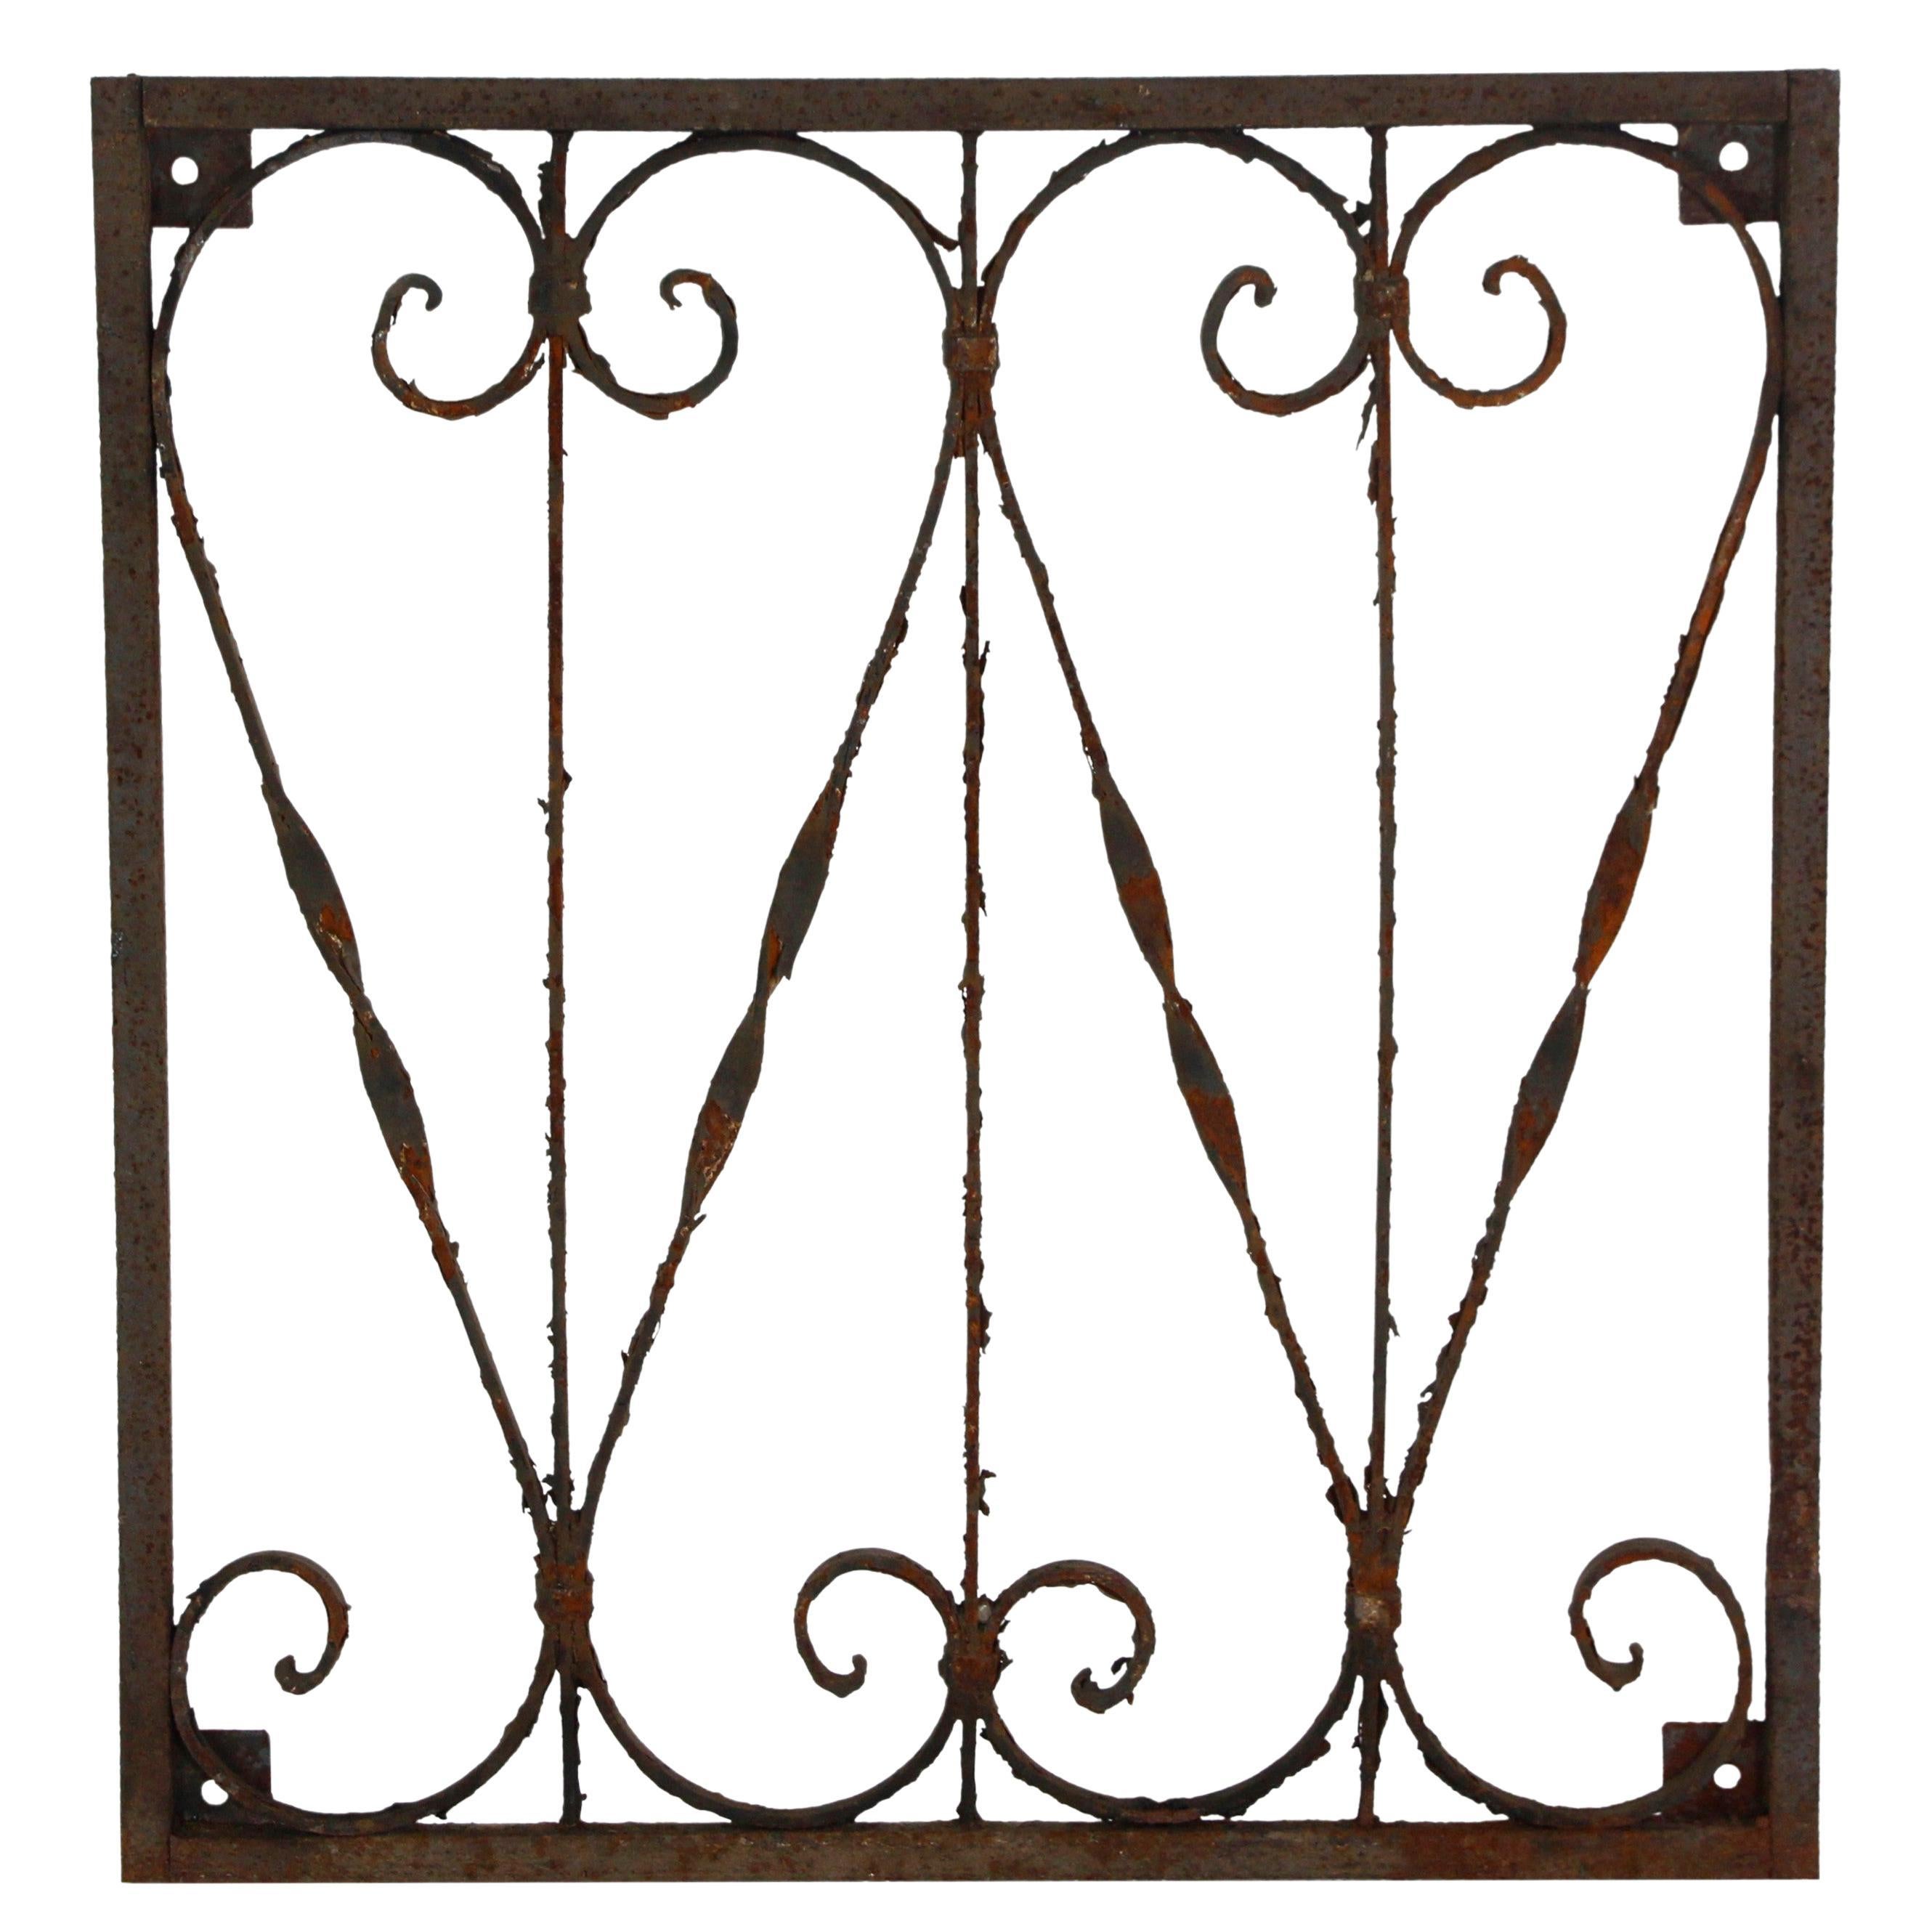 Antique Hand Wrought Iron Gate Fencing Panel w Swirls Pinning Construction